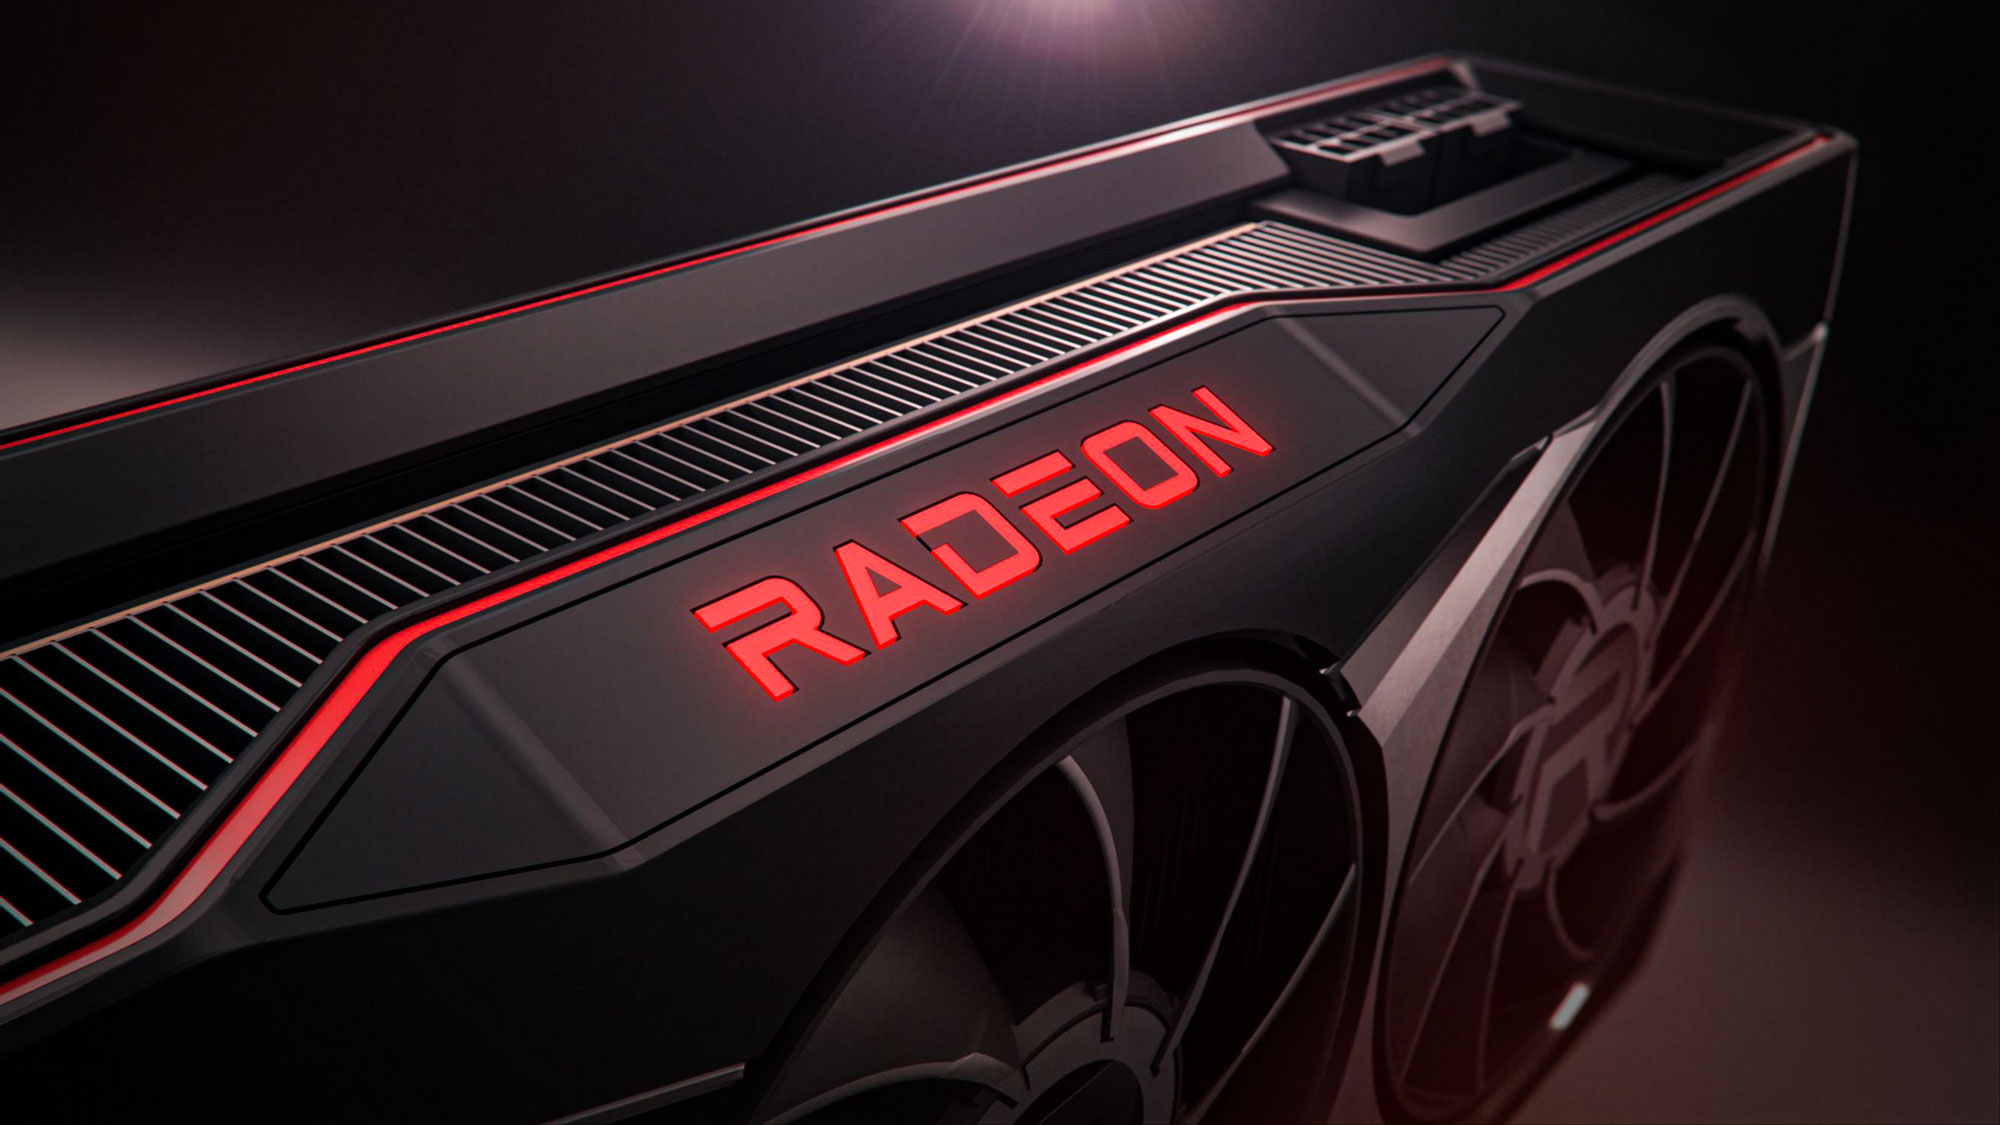 AMD Radeon RX series: Everything we know about 3 | Digital Trends